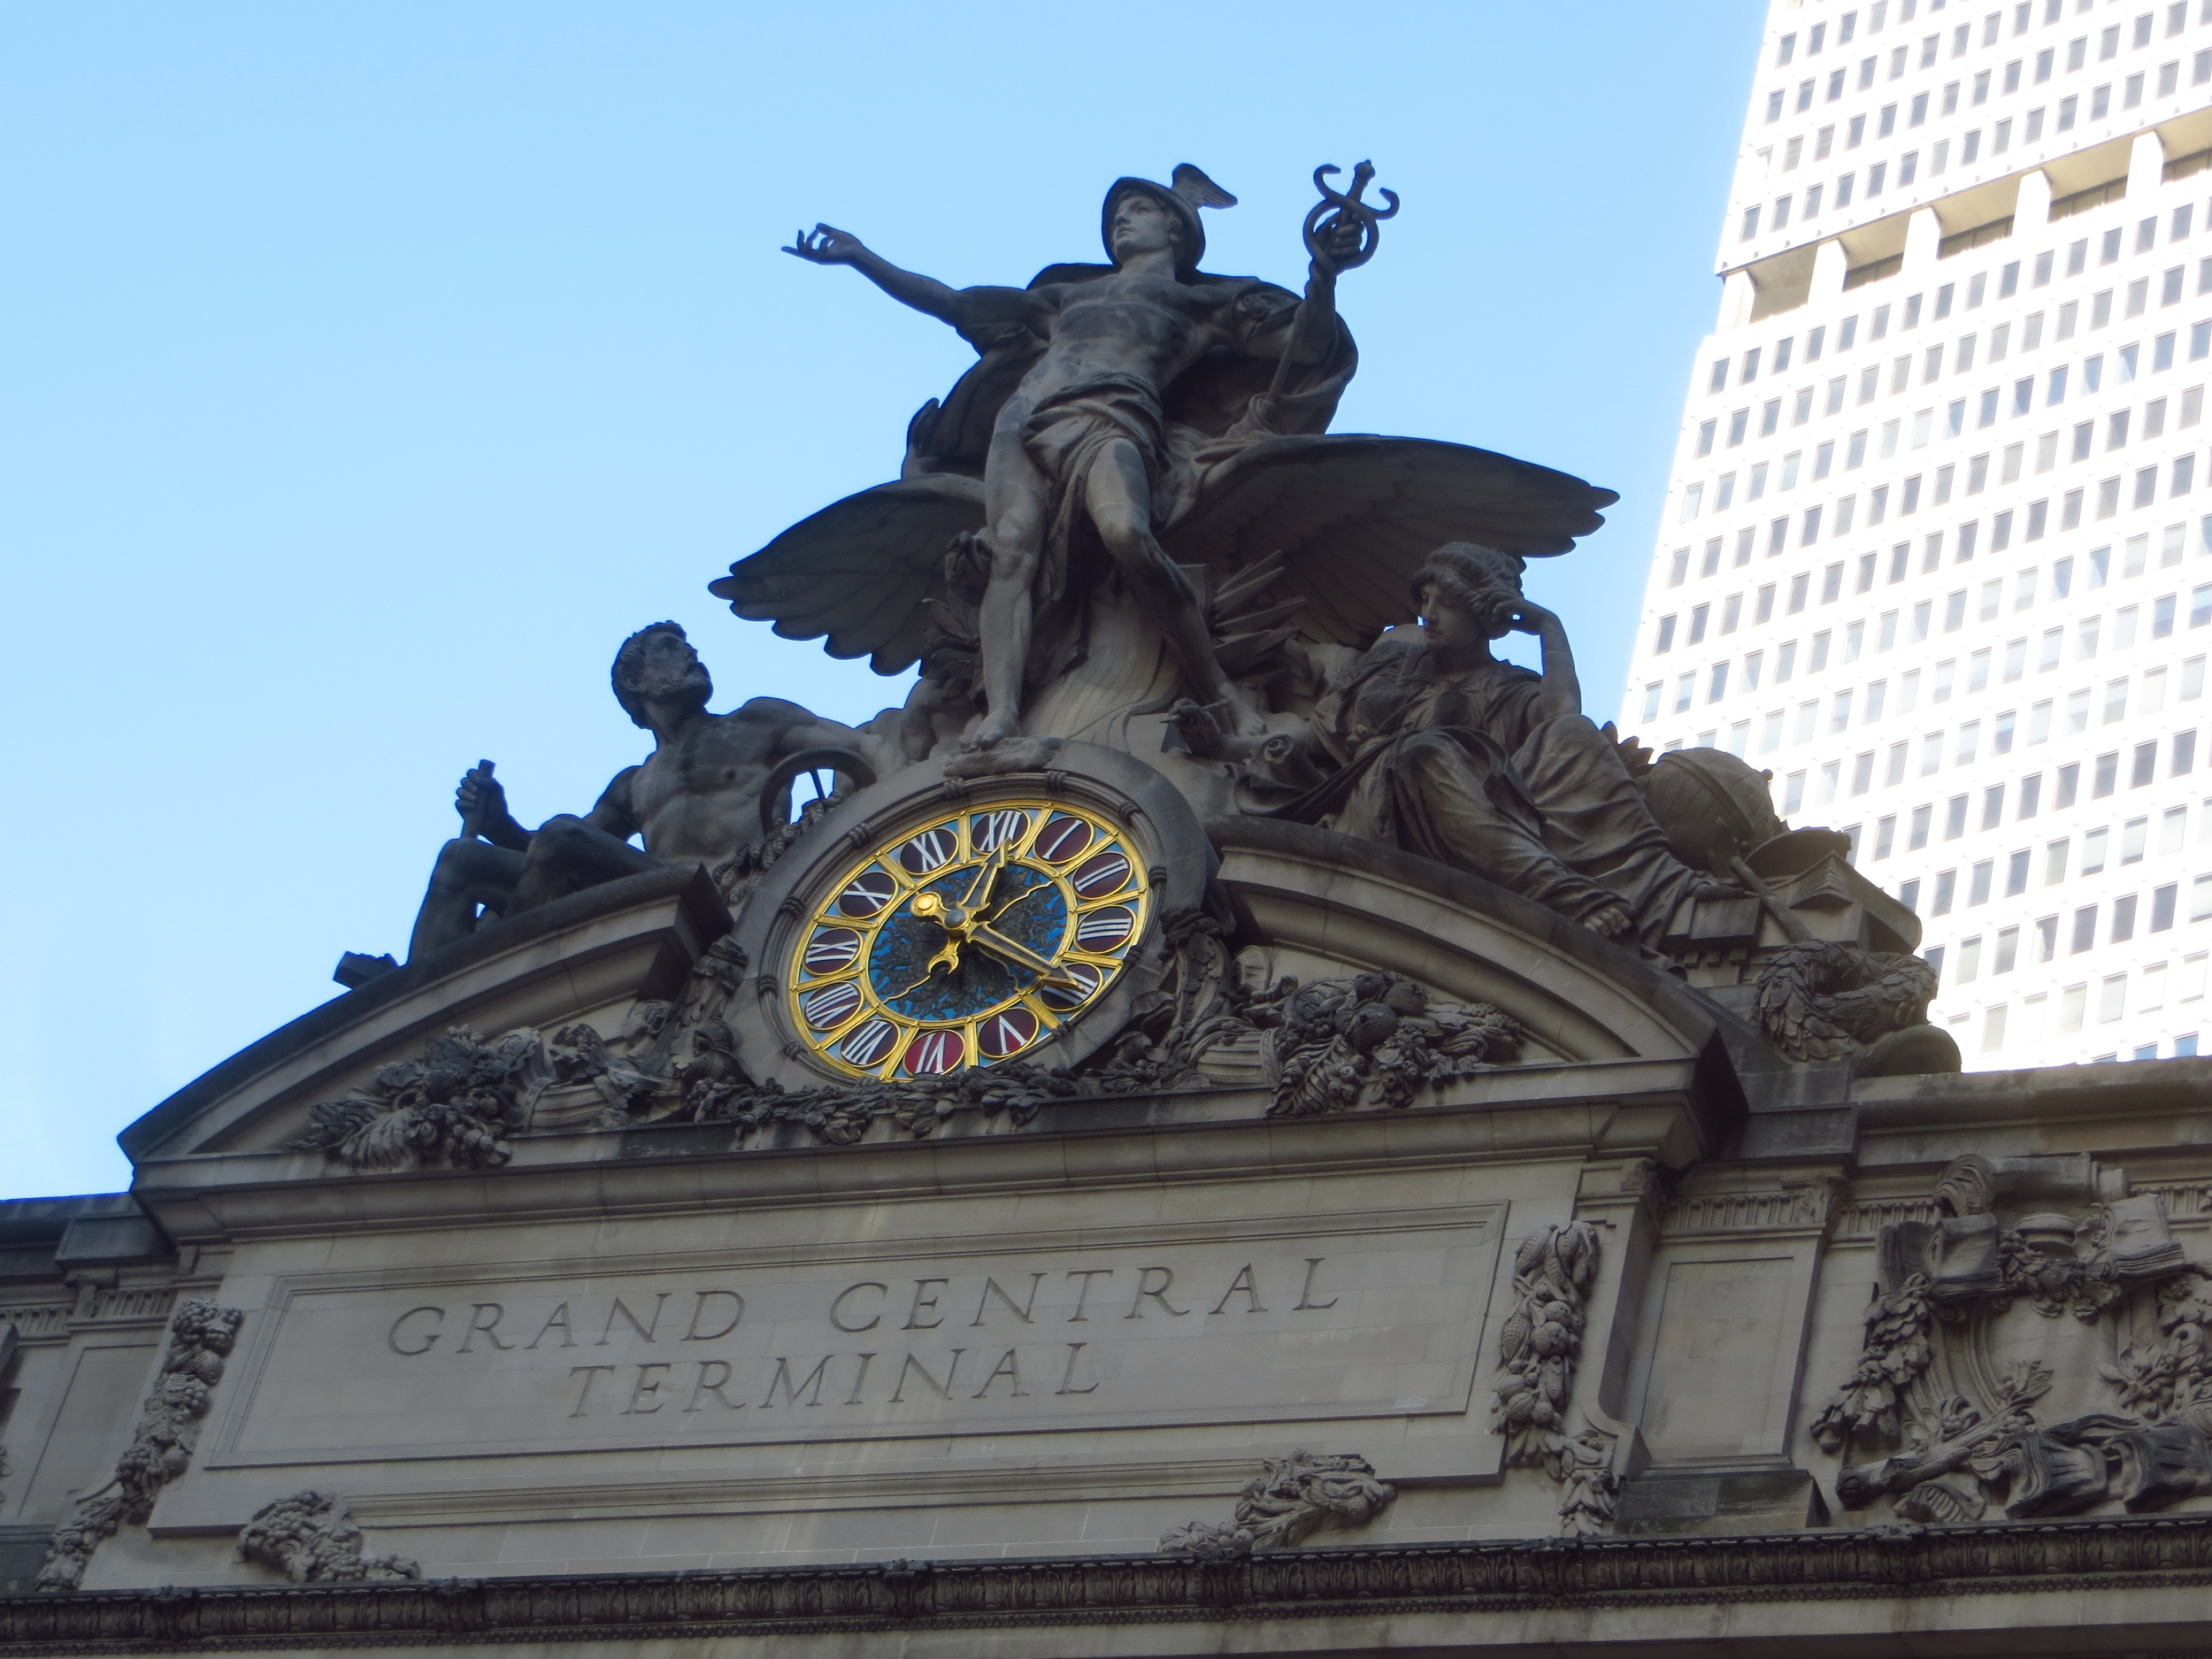 Grand Central Terminal statues